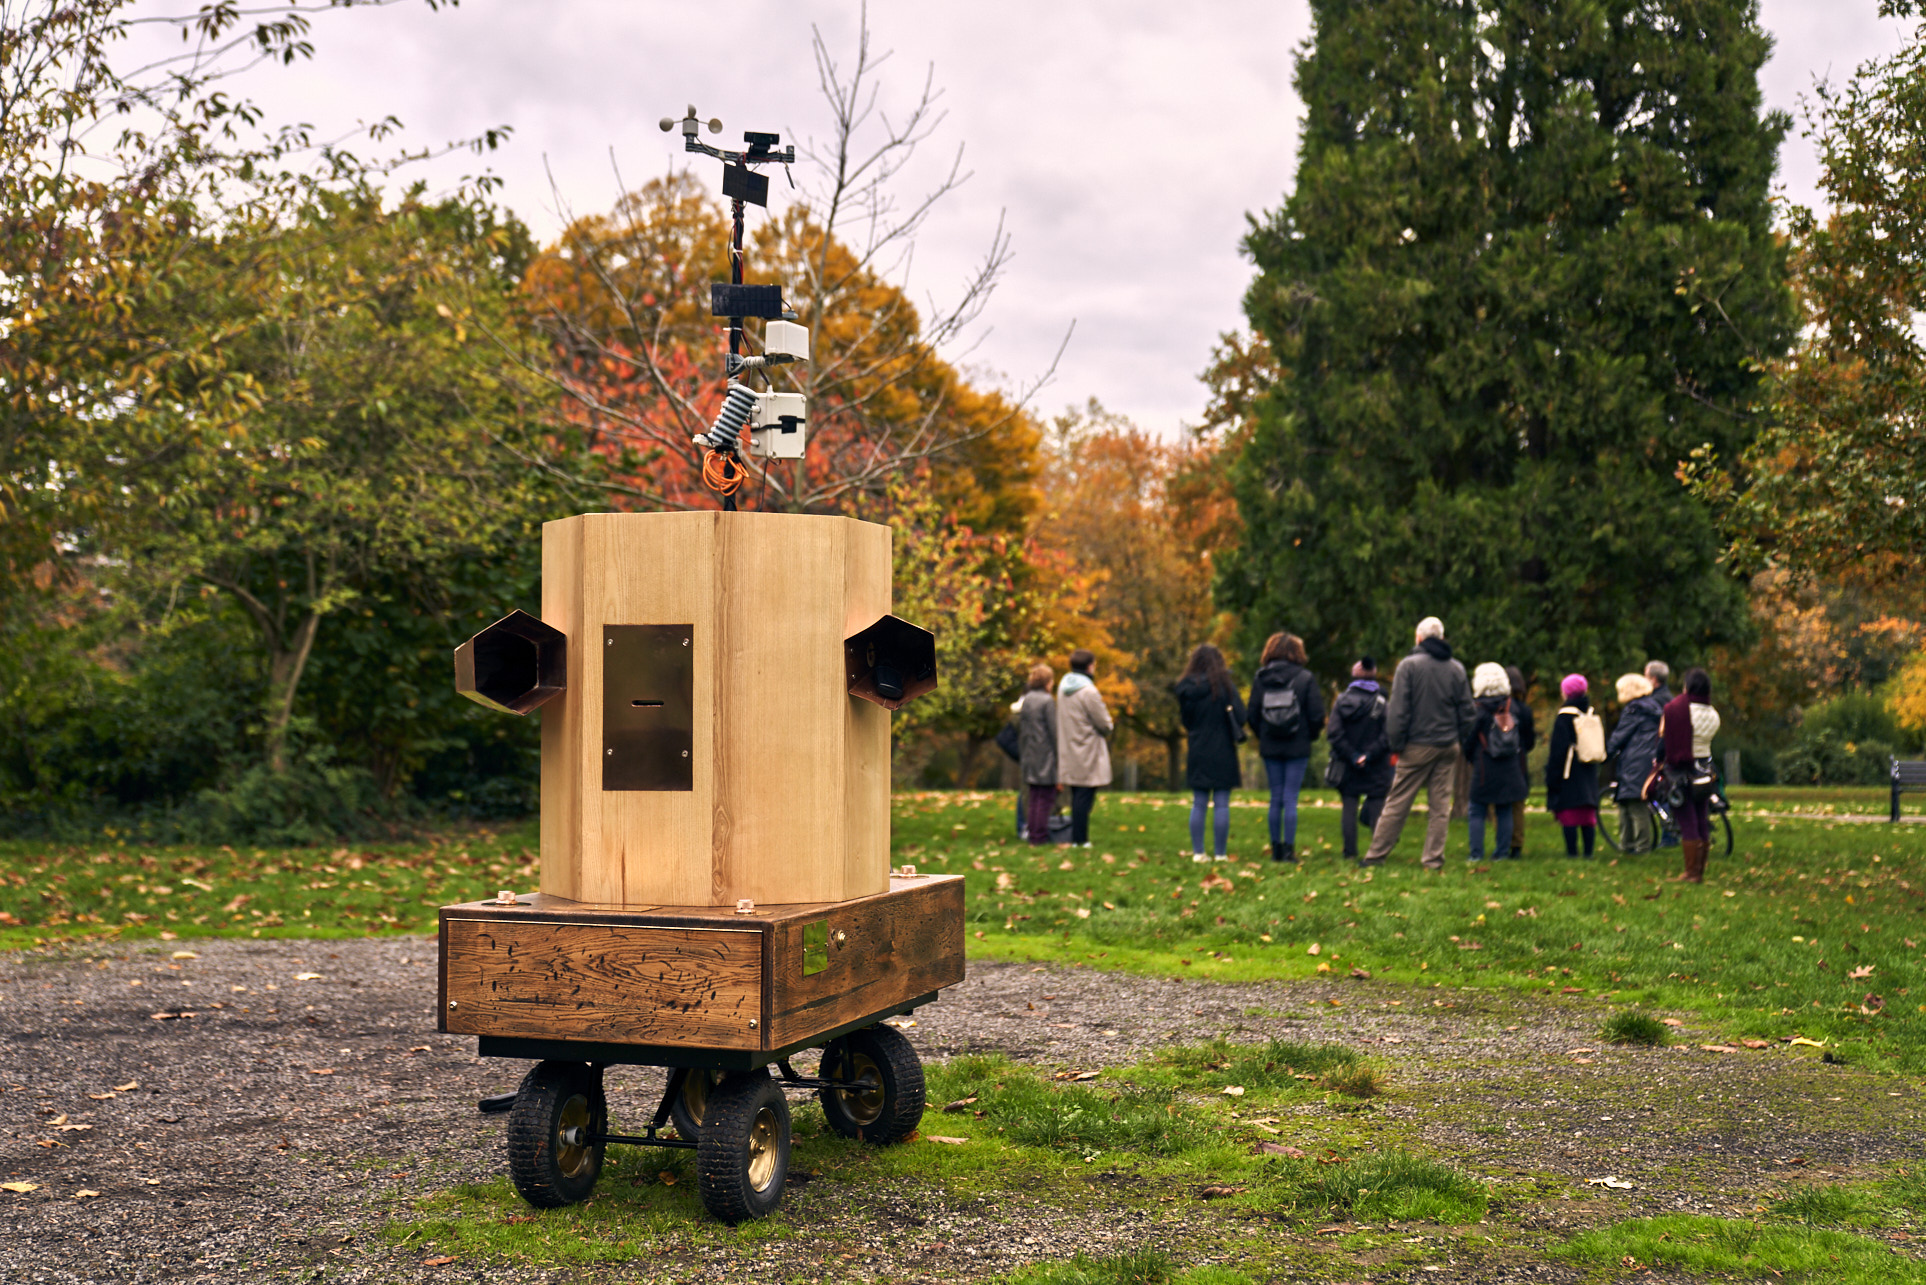 Future Machine standing in the remembrance circle in Finsbury Park, the people in the procession are in the background looking out at the Autumnal trees